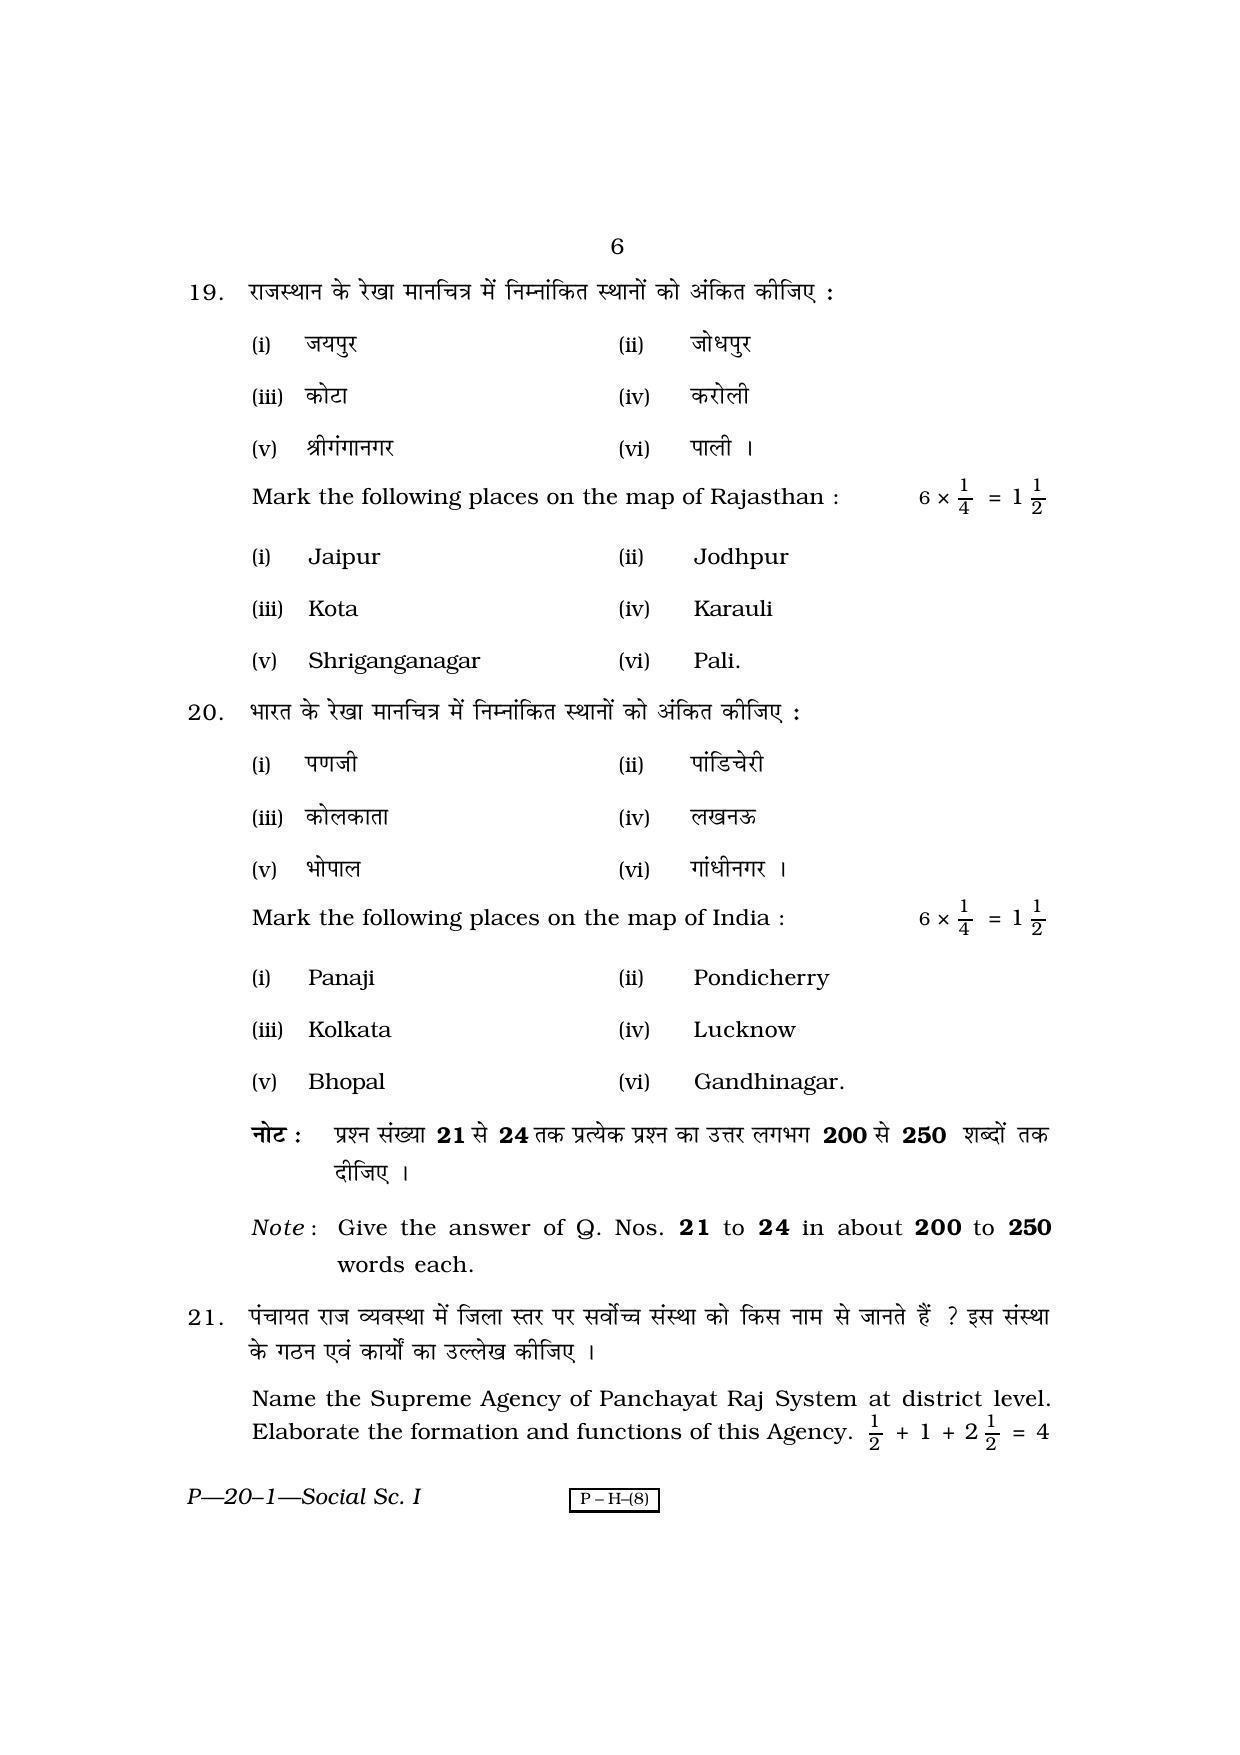 RBSE 2010 Social Science I Praveshika Question Paper - Page 6